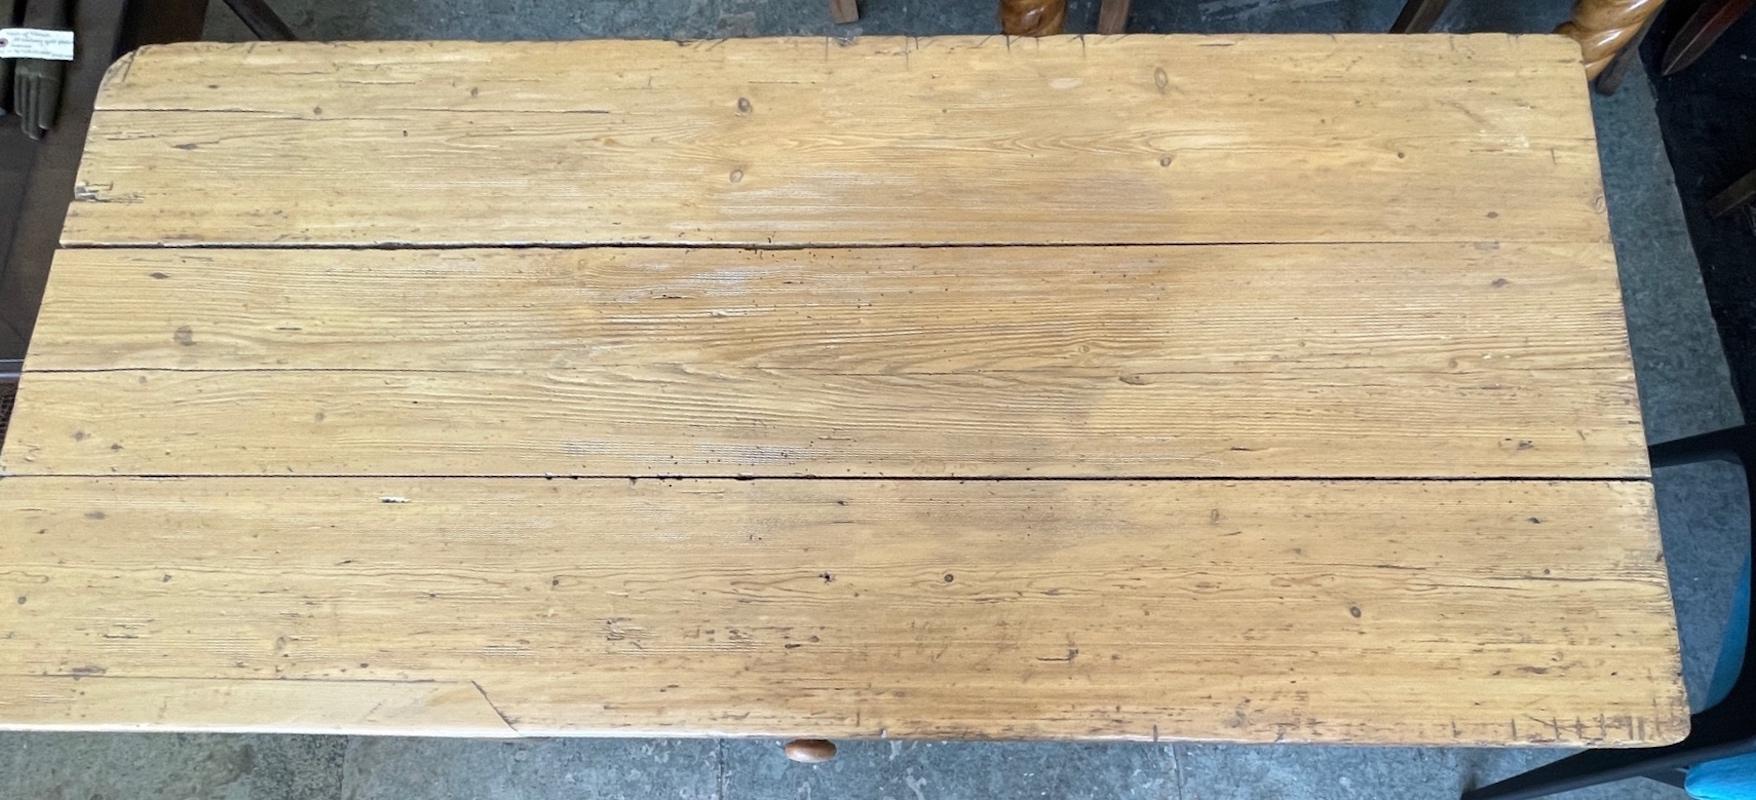 Irish 19th Century Pine Breakfast Table or Desk with One Center Drawer For Sale 4